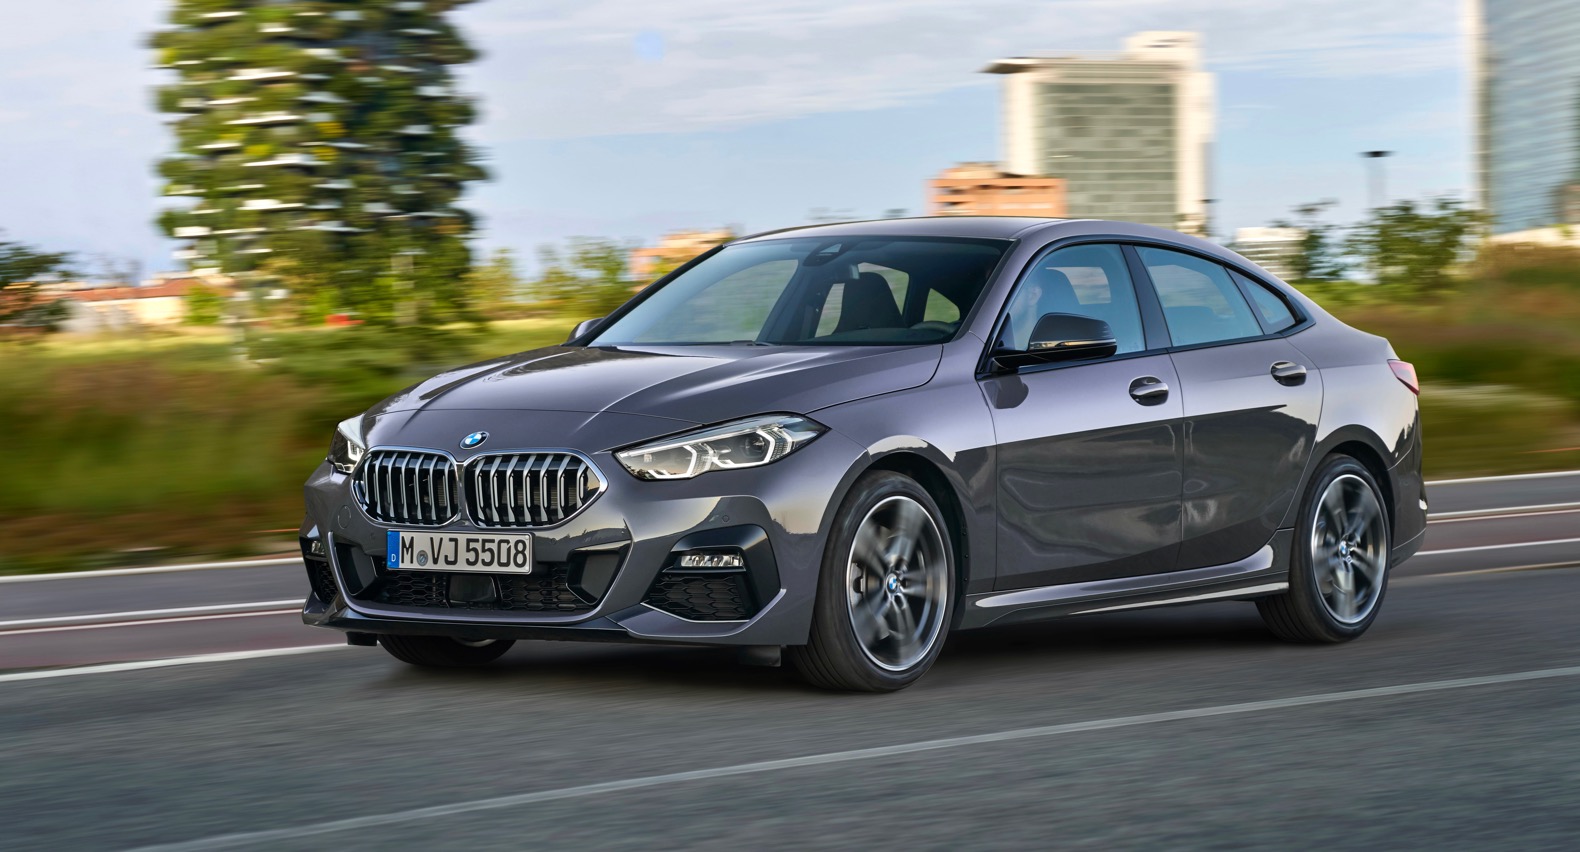 2020 BMW 2 Series Gran Coupe starts at $38,495 - The Torque Report